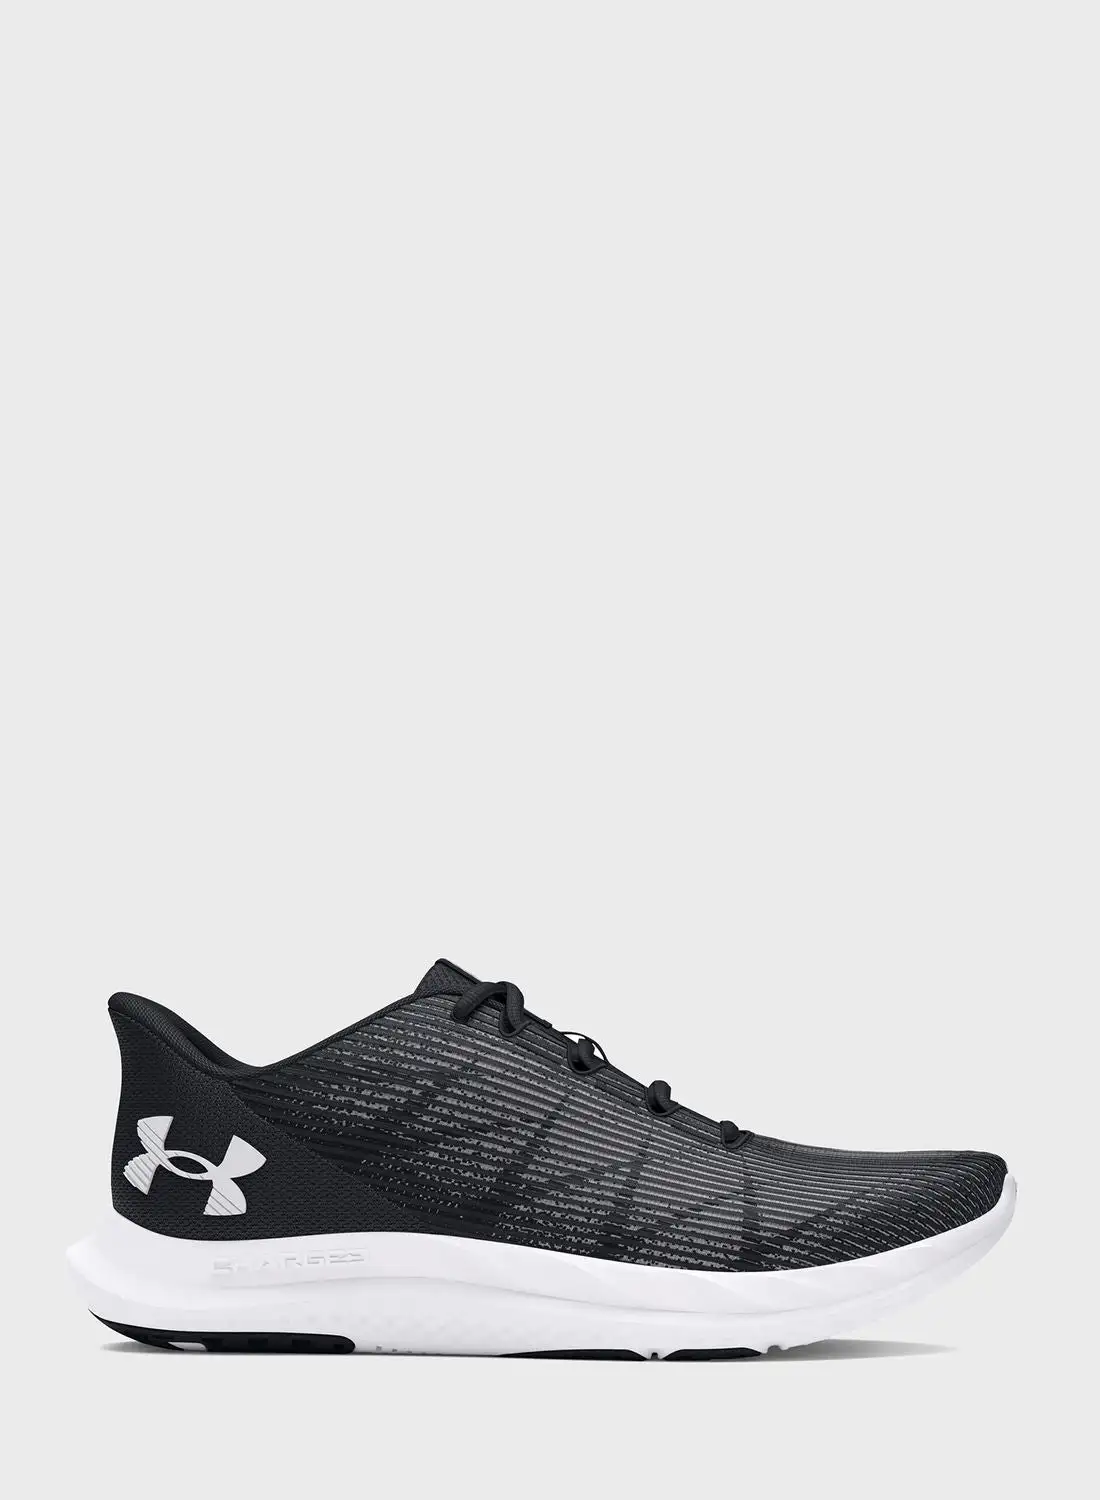 UNDER ARMOUR Charged Speed Swift Running Shoes